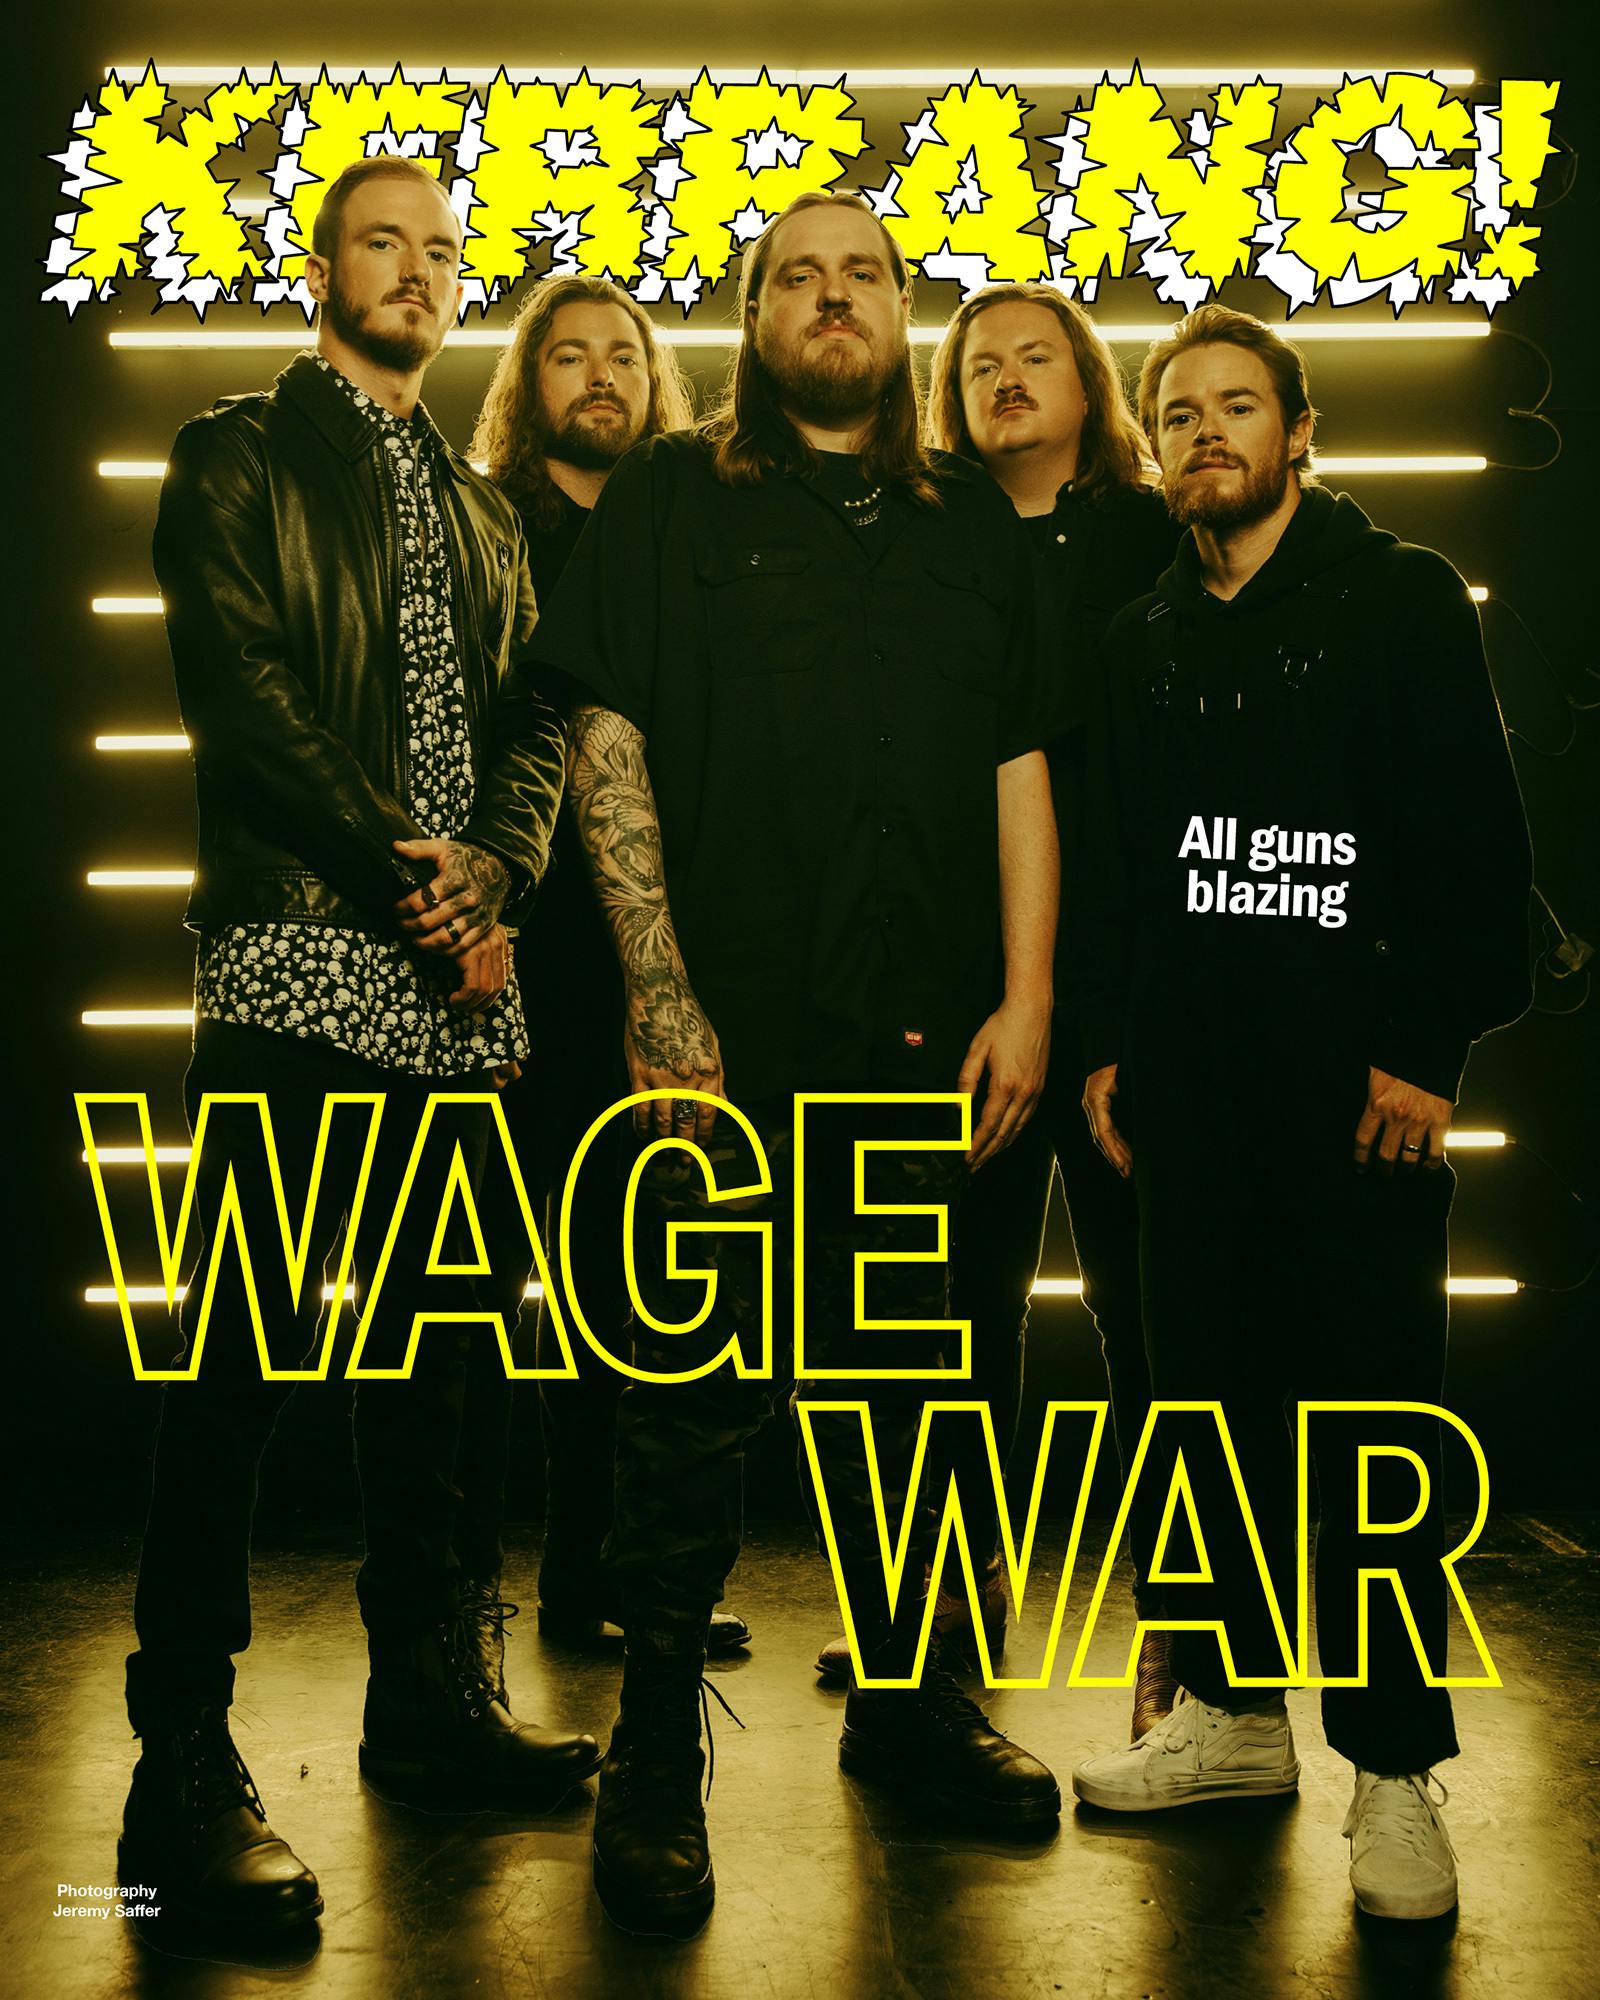 Wage War: “There’s nothing better than seeing your fans connect to music you feel proud to have made”